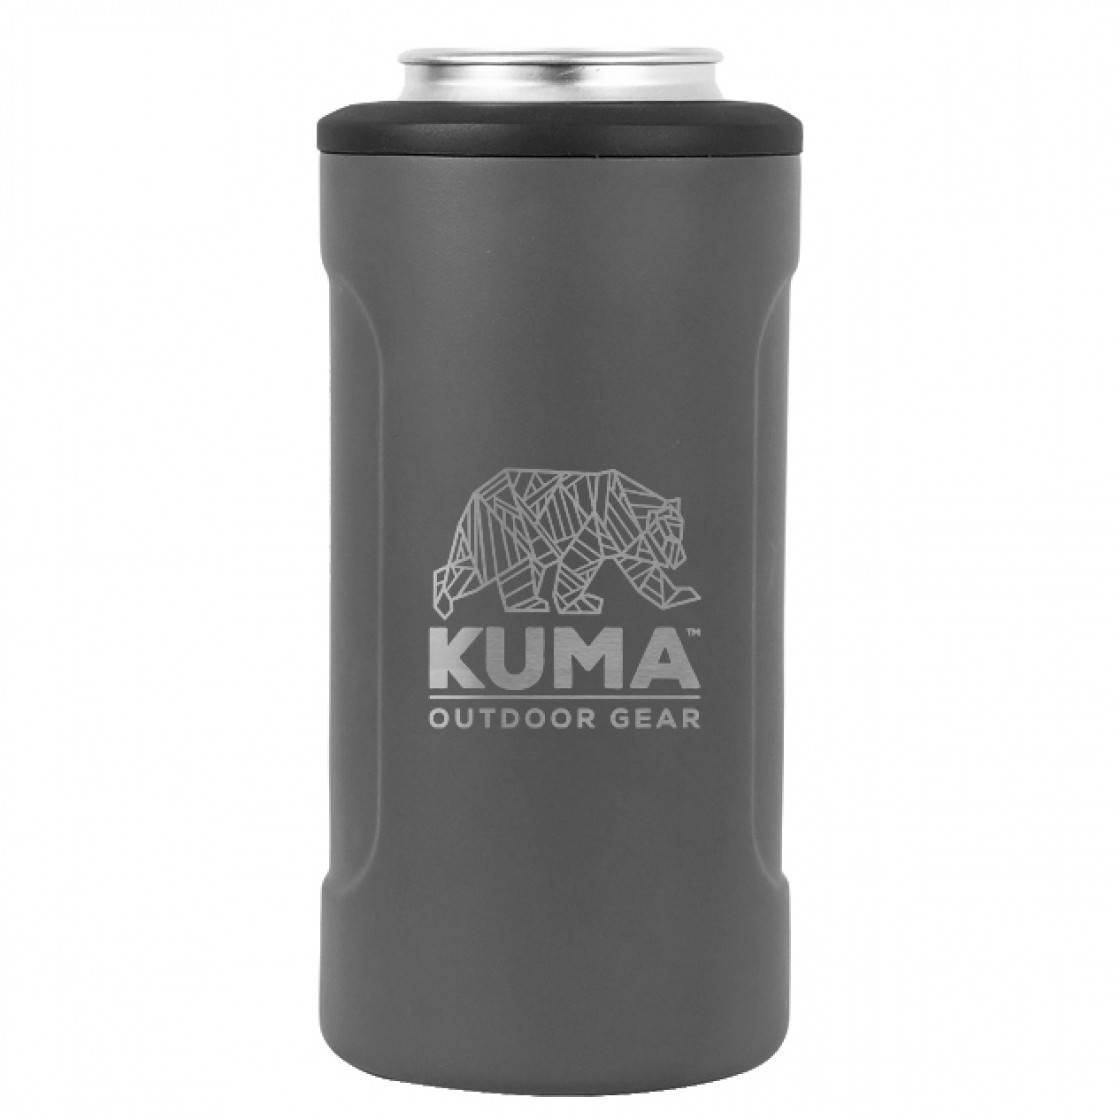 Kuma Outdoor Gear Qualifies for Free Shipping Kuma Outdoor Gear 3-In-1 Coozie Gray #KM-31CZ-GRY